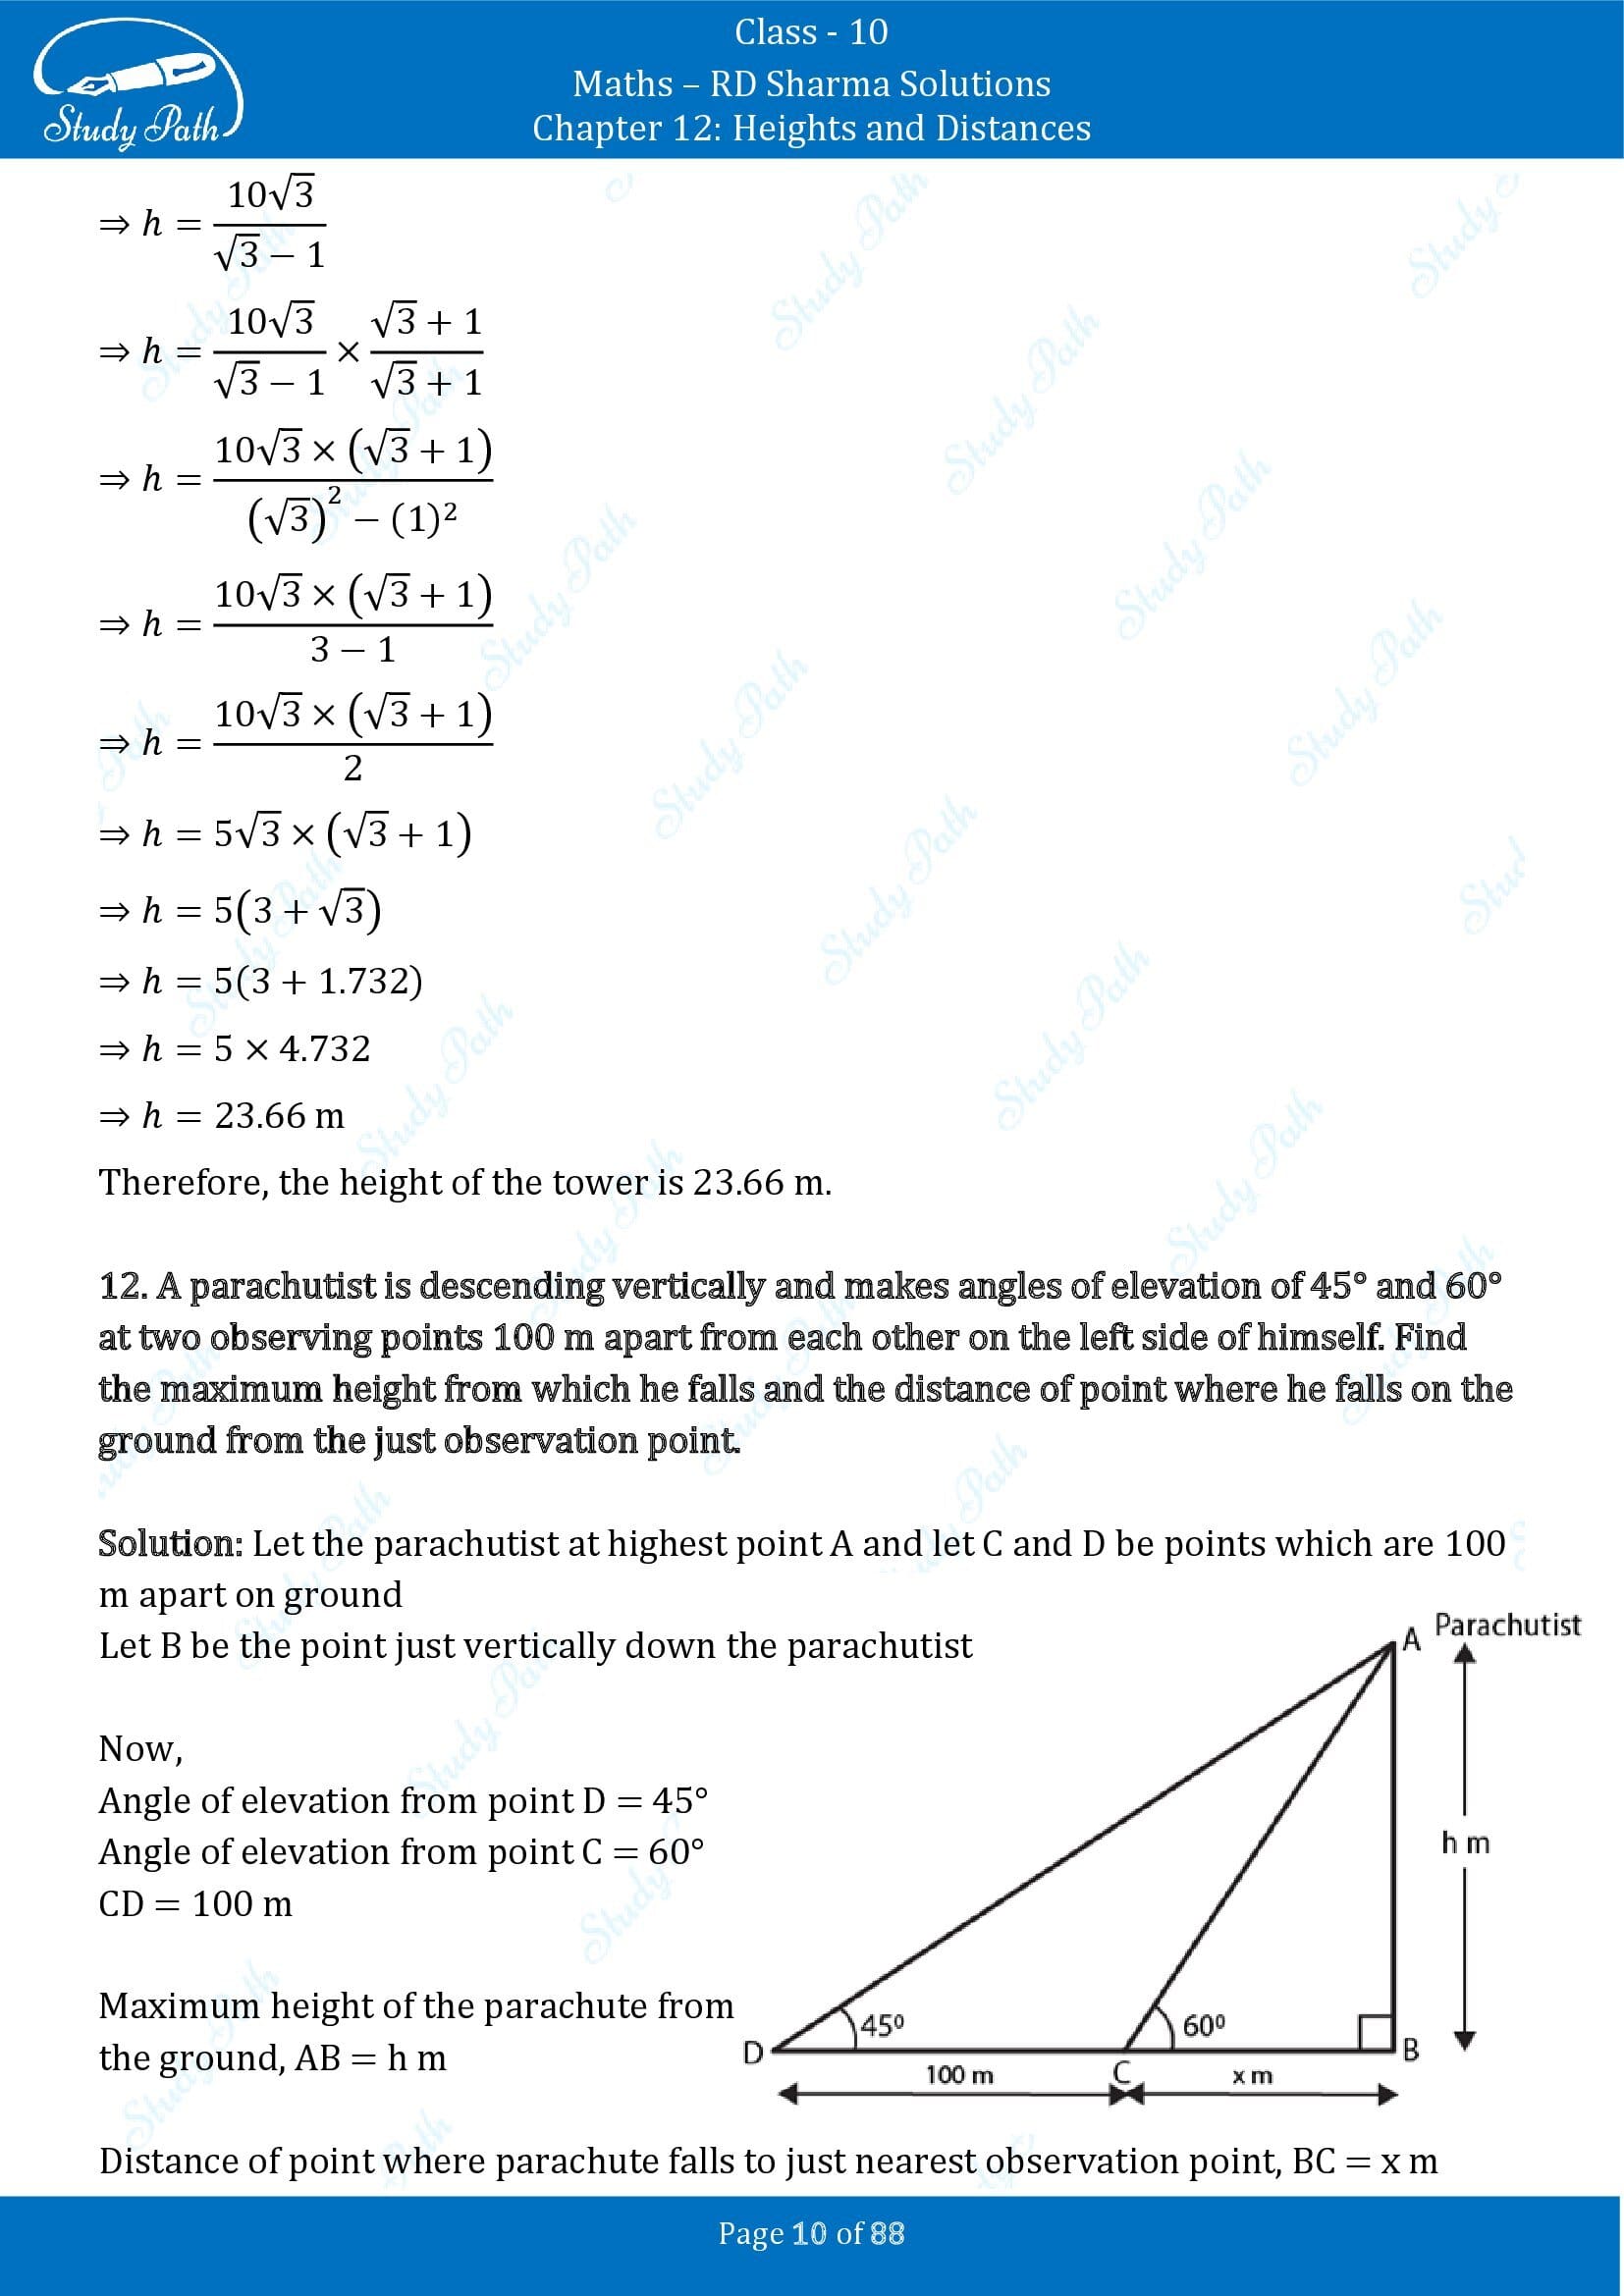 RD Sharma Solutions Class 10 Chapter 12 Heights and Distances Exercise 12.1 00010